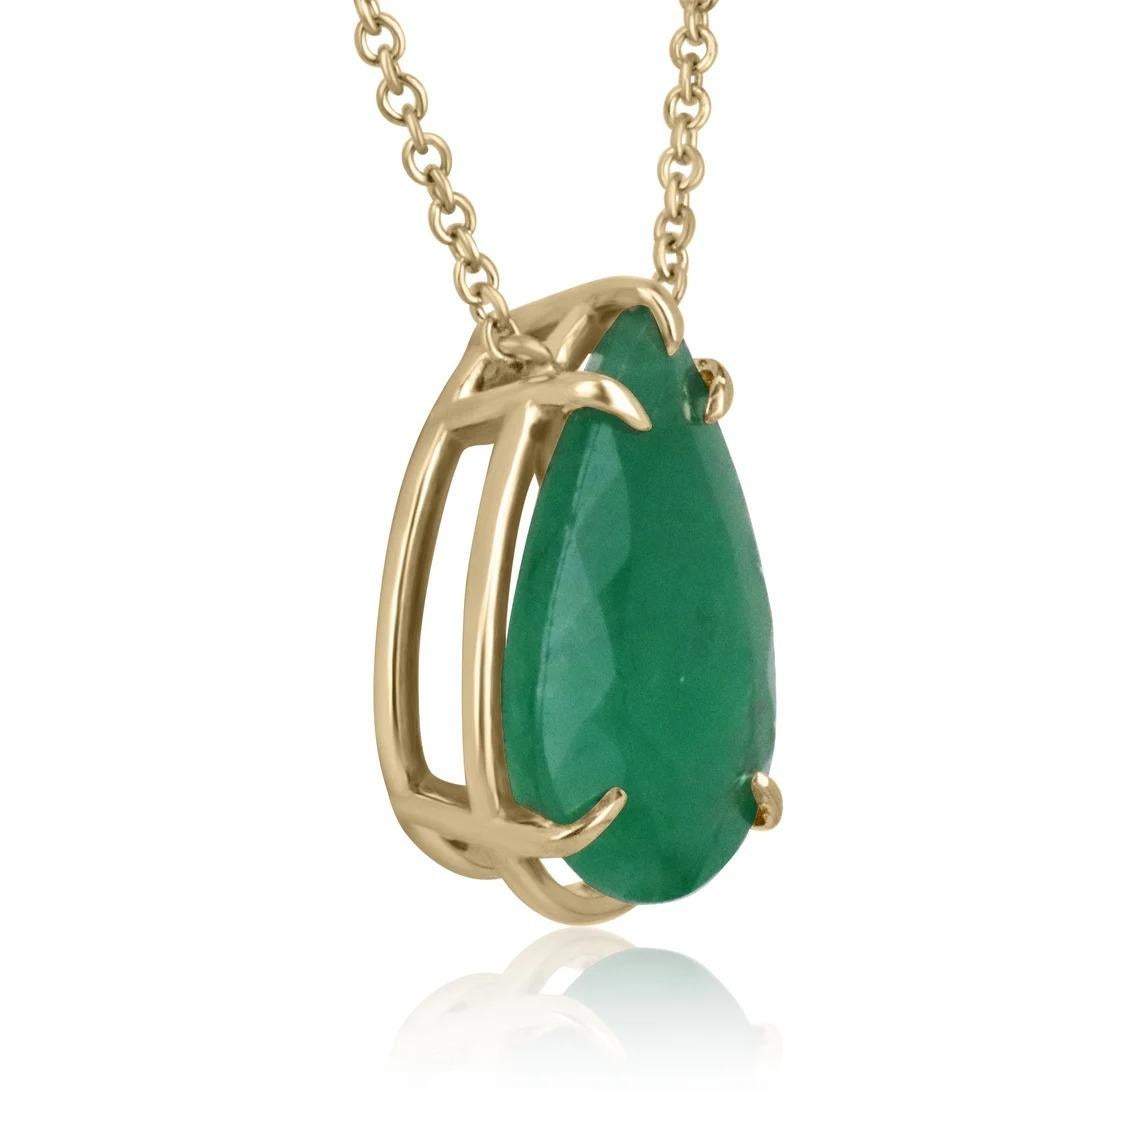 Displayed is a classic Brazillian emerald solitaire necklace set in 14K yellow gold. This gorgeous solitaire ring carries a full 9.30-carat emerald in a five-prong setting. Fully faceted, this gemstone showcases excellent shine. The emerald has good